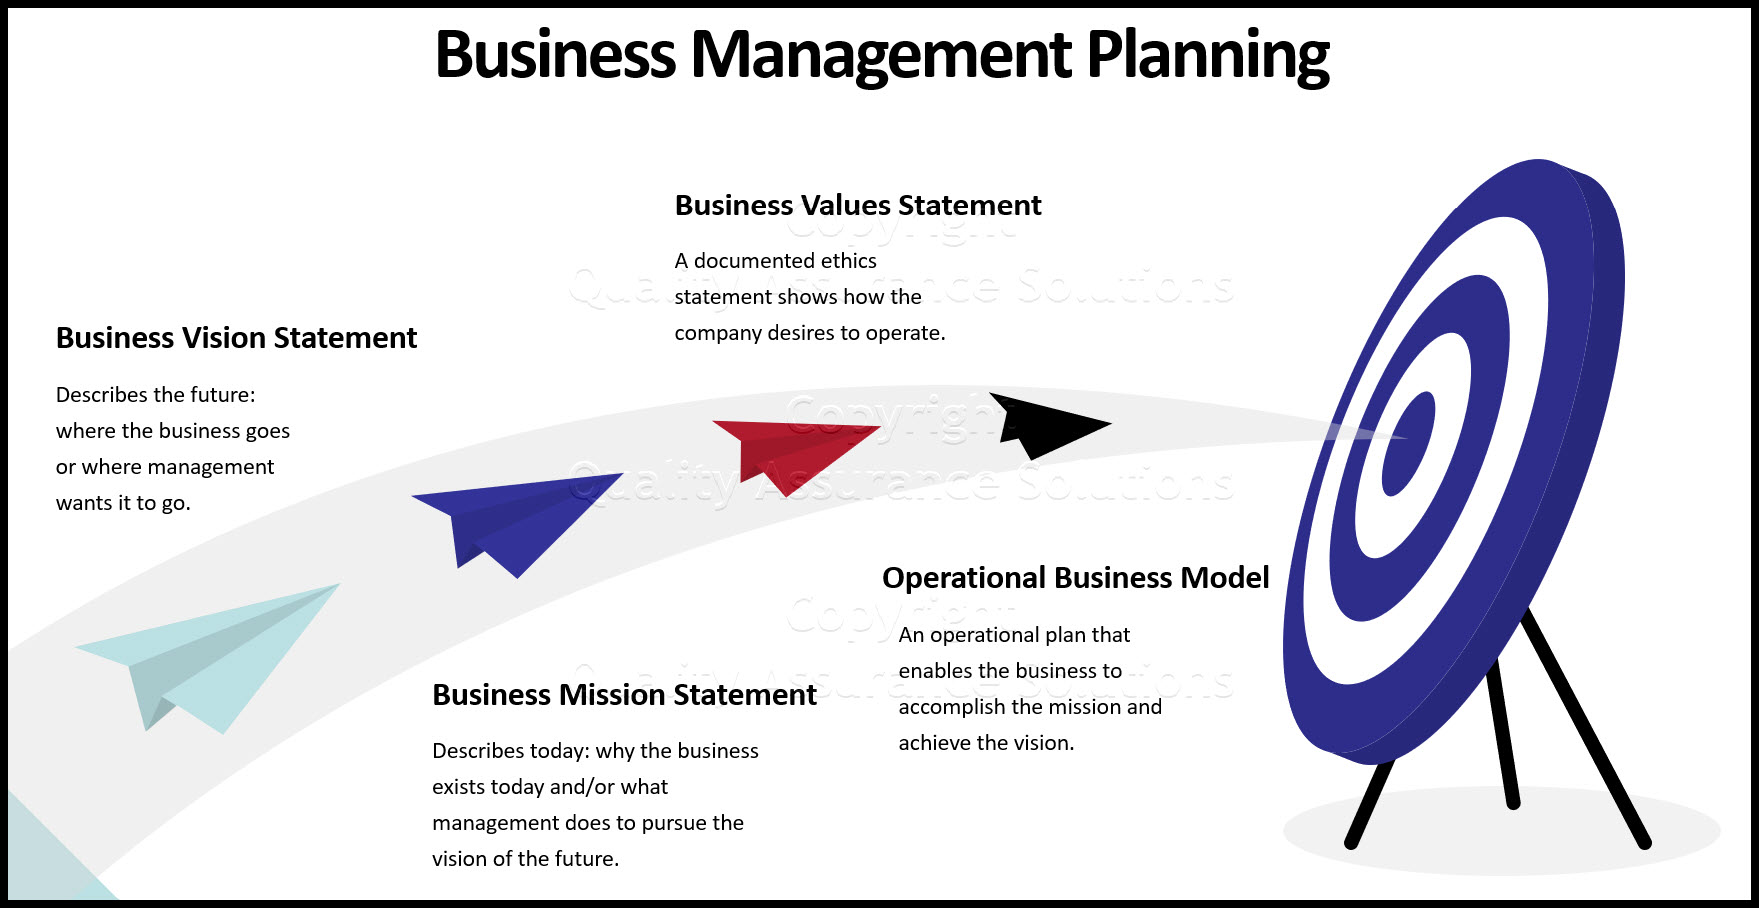 The basics of business management planning includes understanding your vision, mission, values, and business model. Then you need to manage the business. This article discusses these and more.